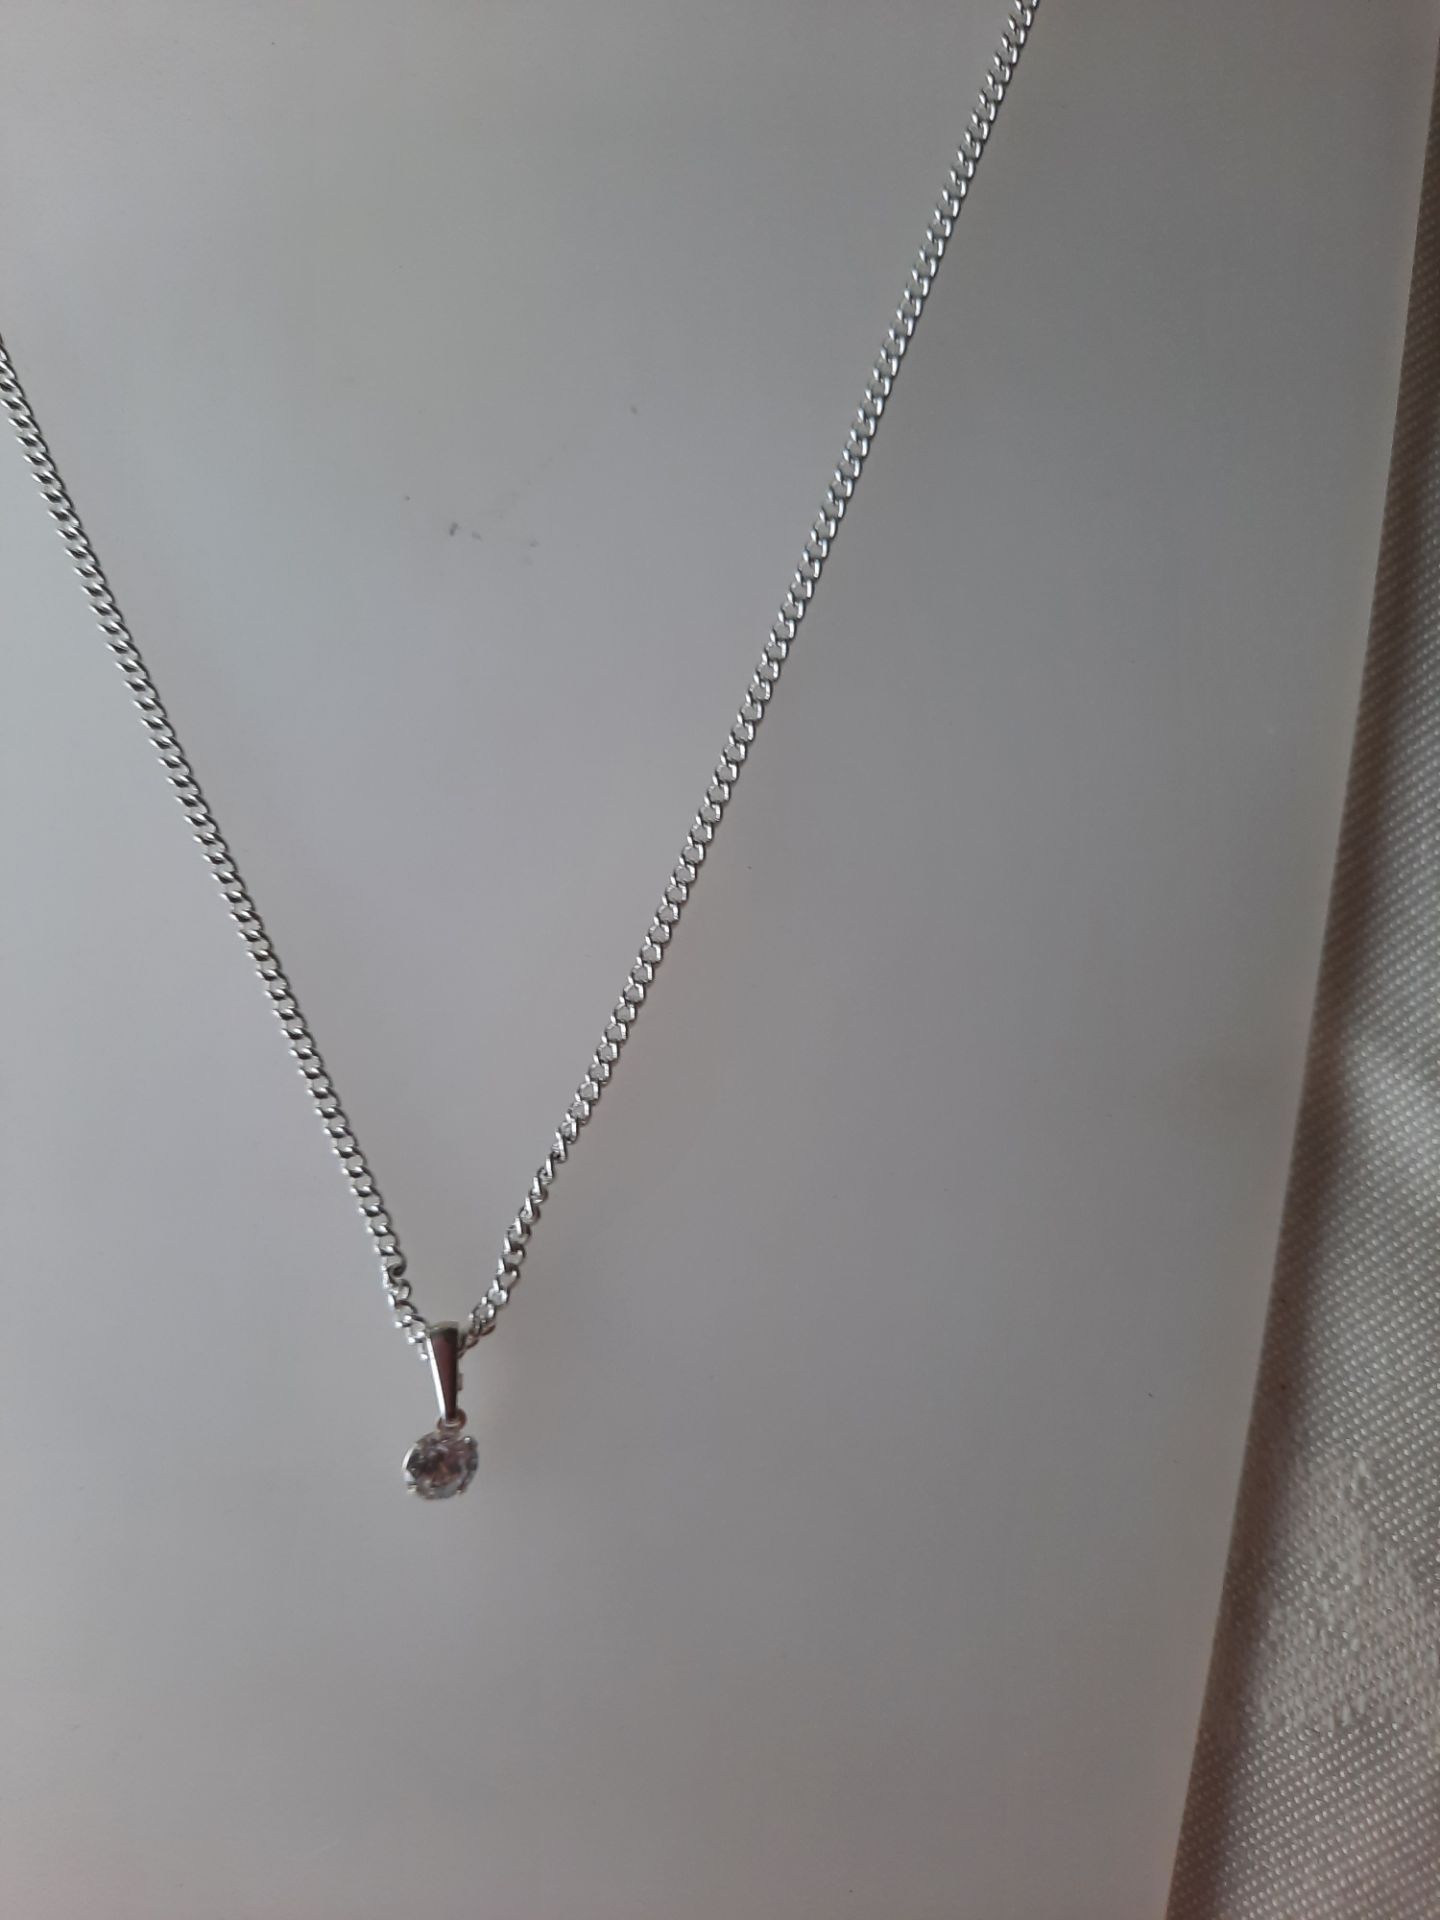 Pendant and Chain Necklace. CZ Stones RRP £34.99 - Image 6 of 8